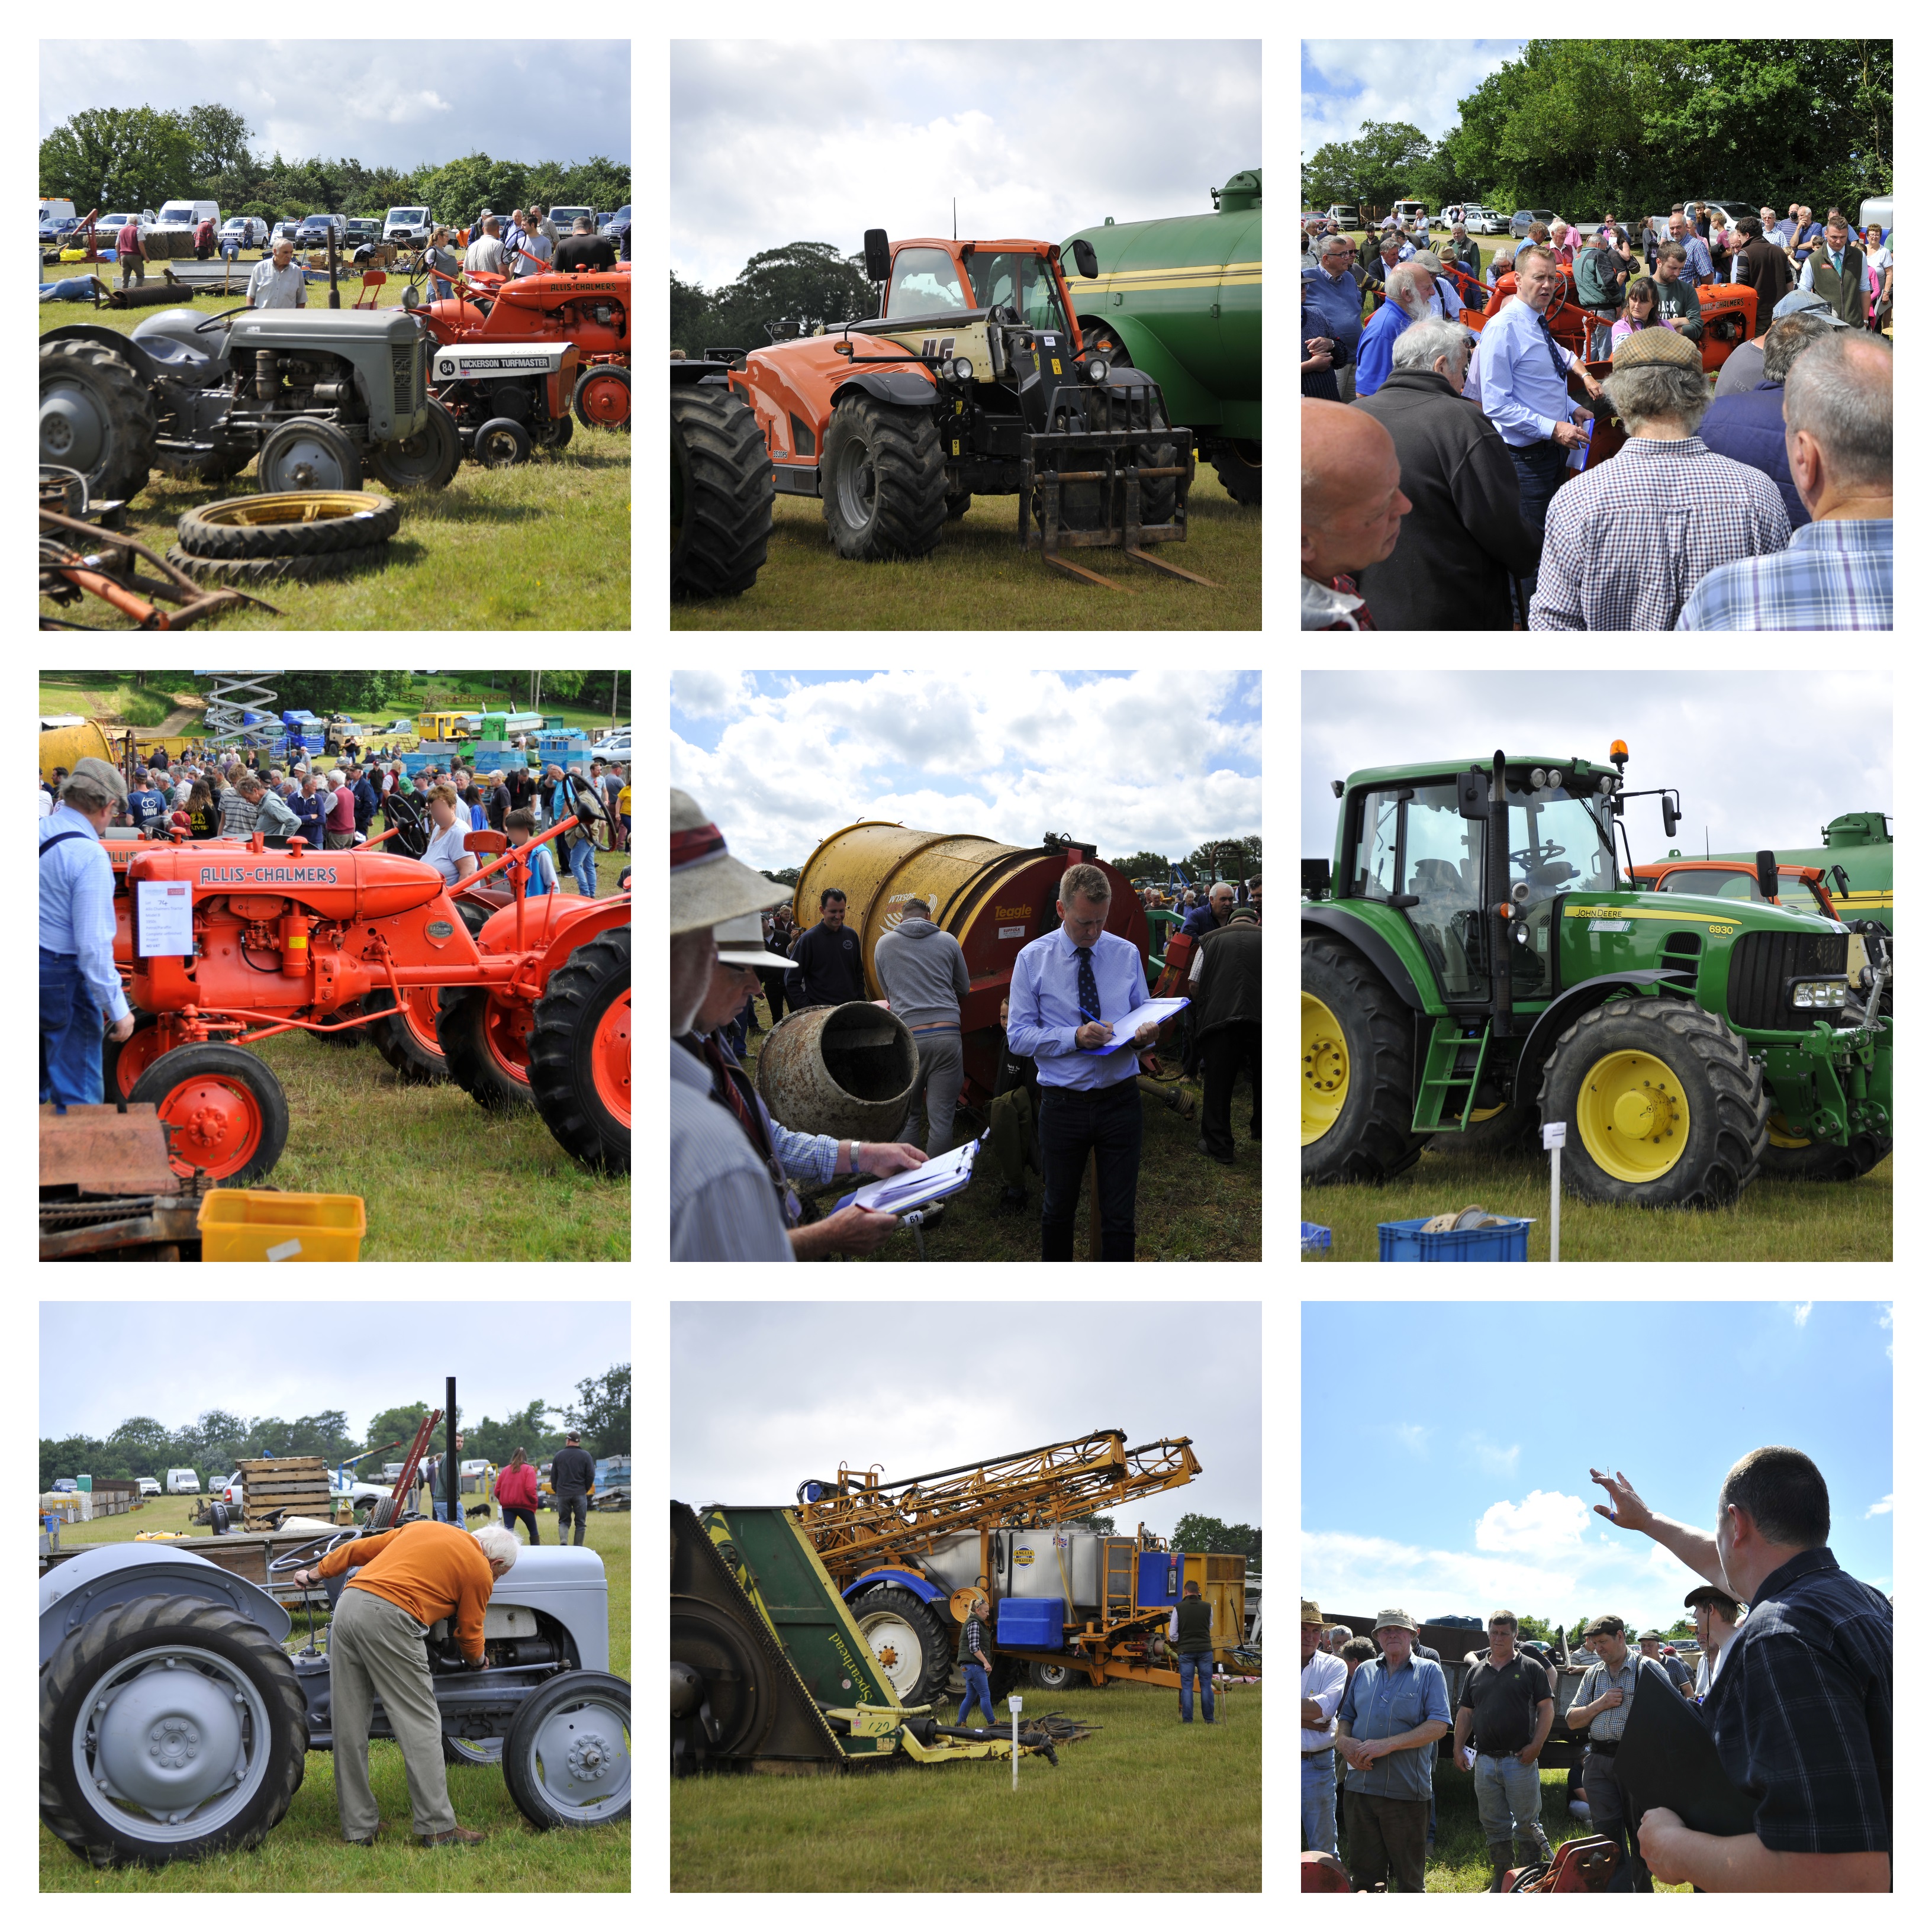 Annual Collective Farm Machinery & Equipment Auction